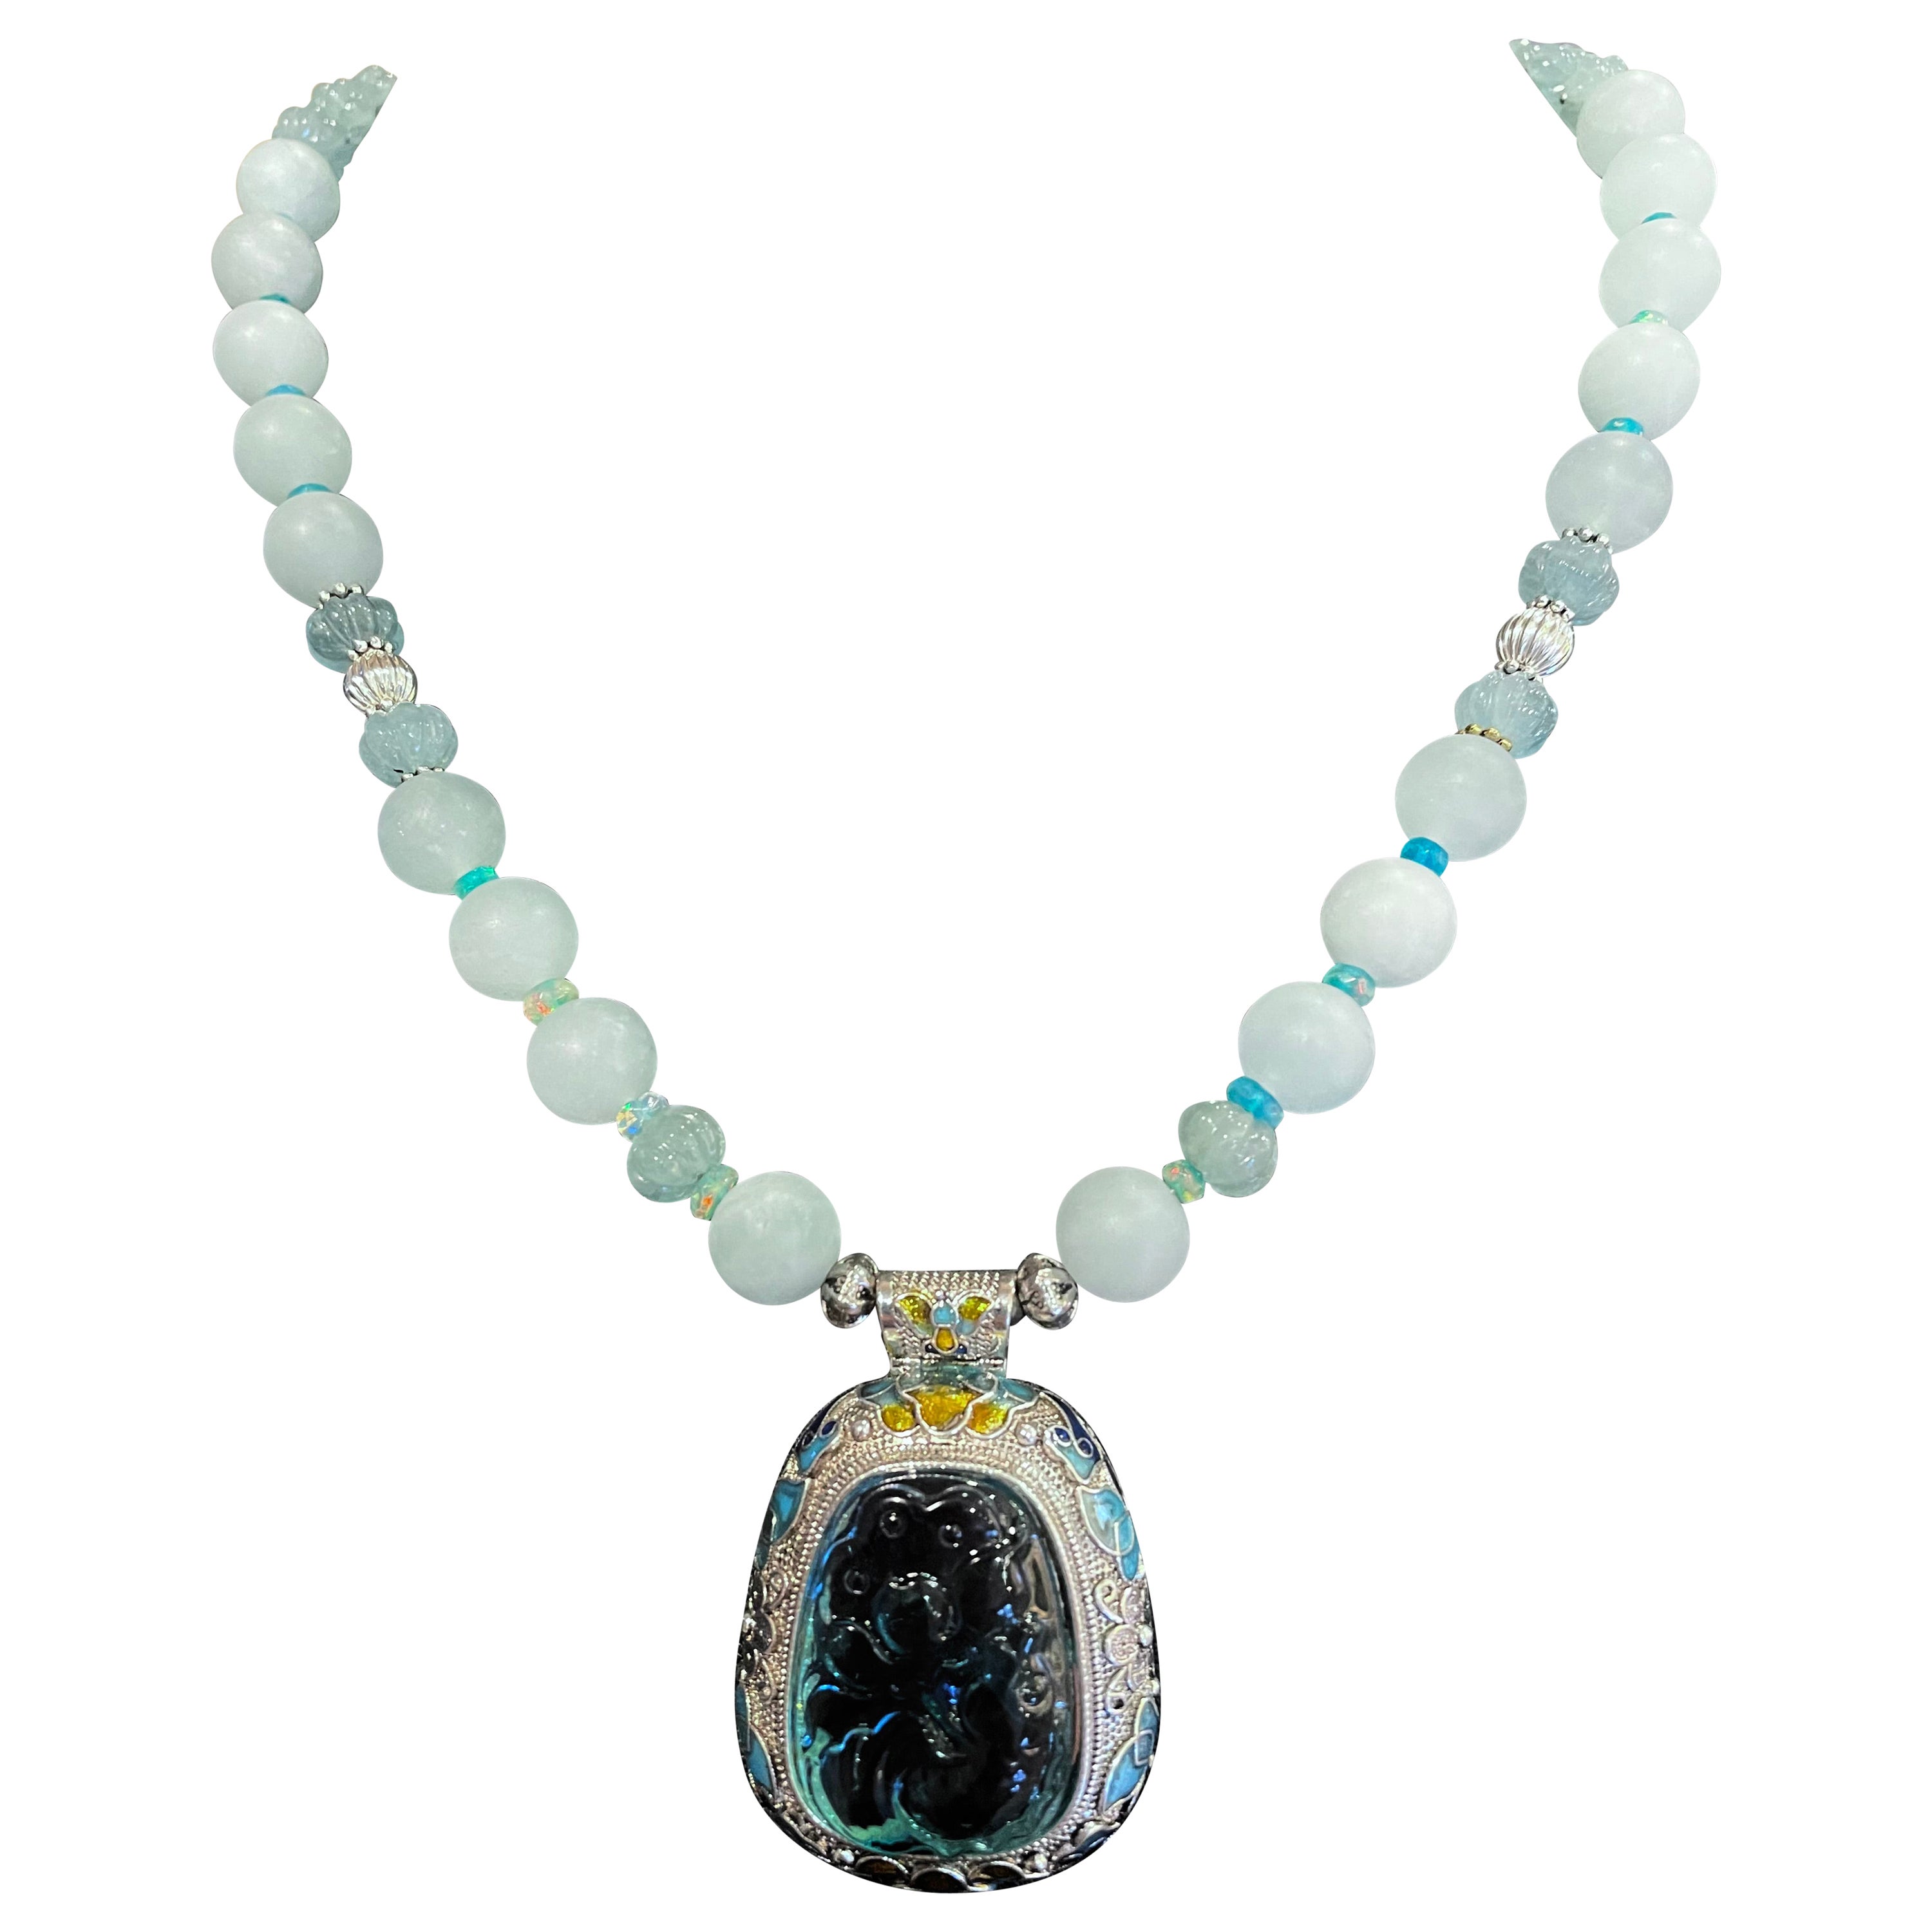 LB offers Sterling Silver Glass Aquamarine Opal Enamel Chinese pendant necklace For Sale